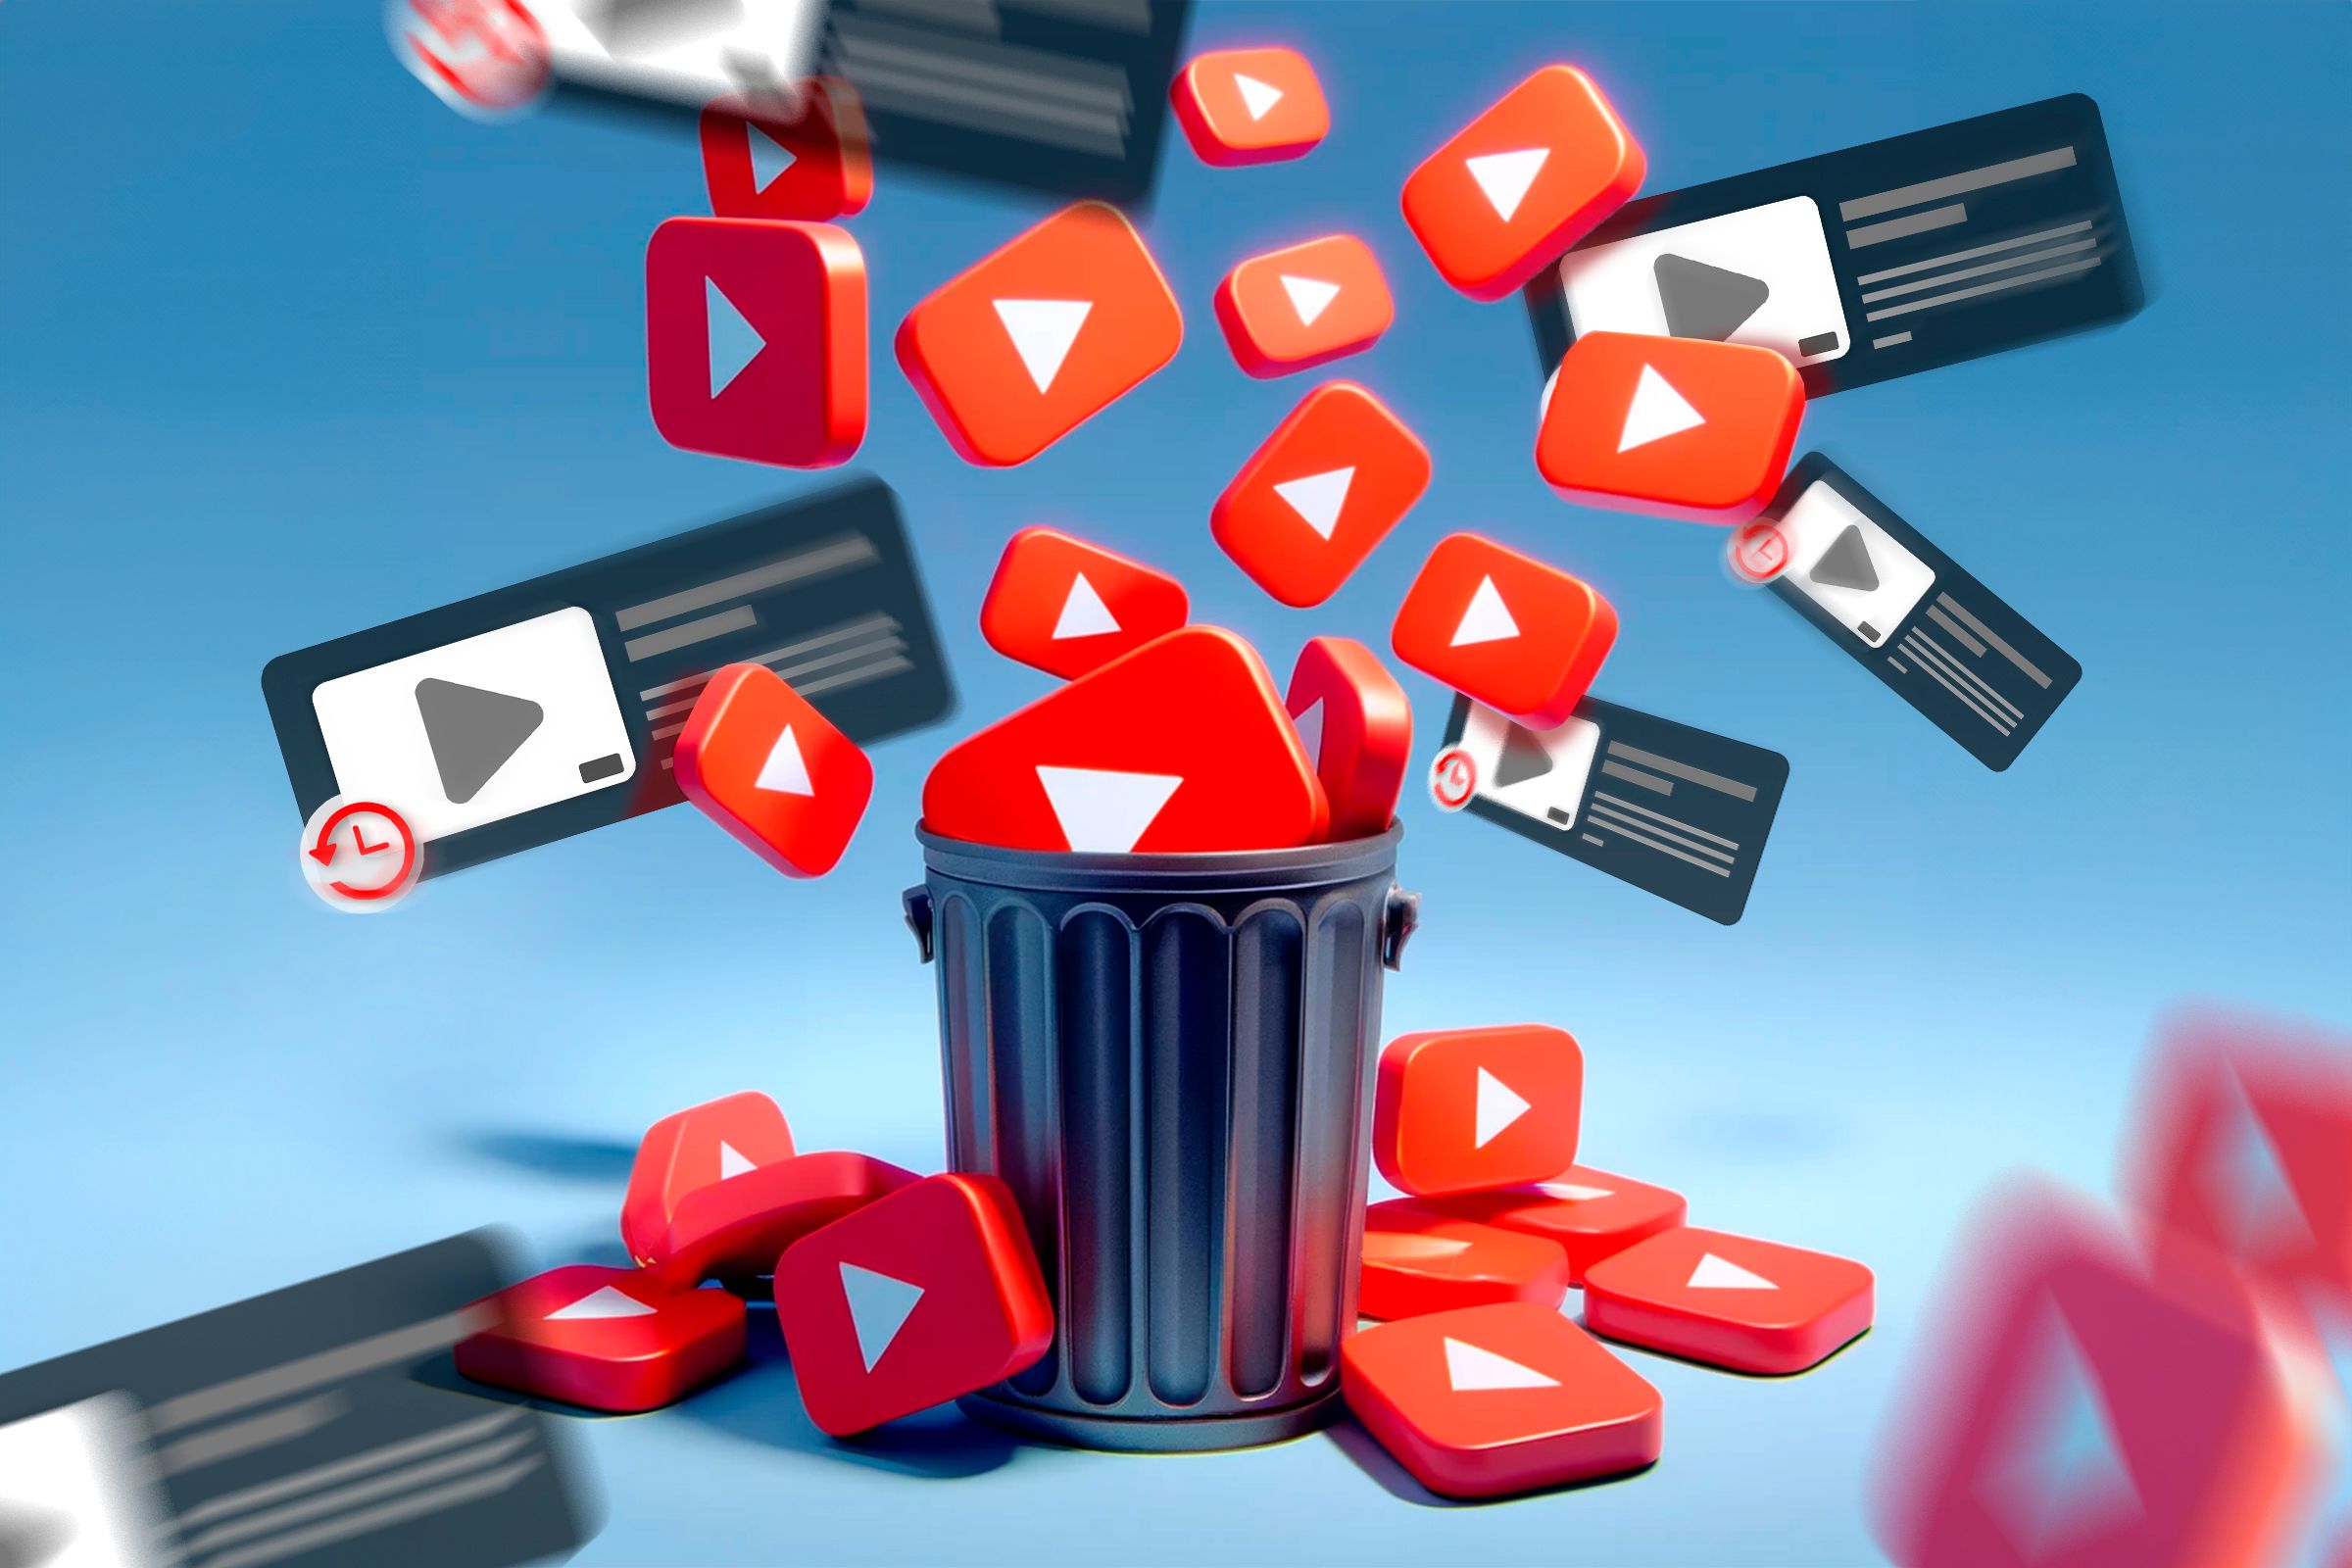 Illustration of the YouTube icon and some videos around a trash can.